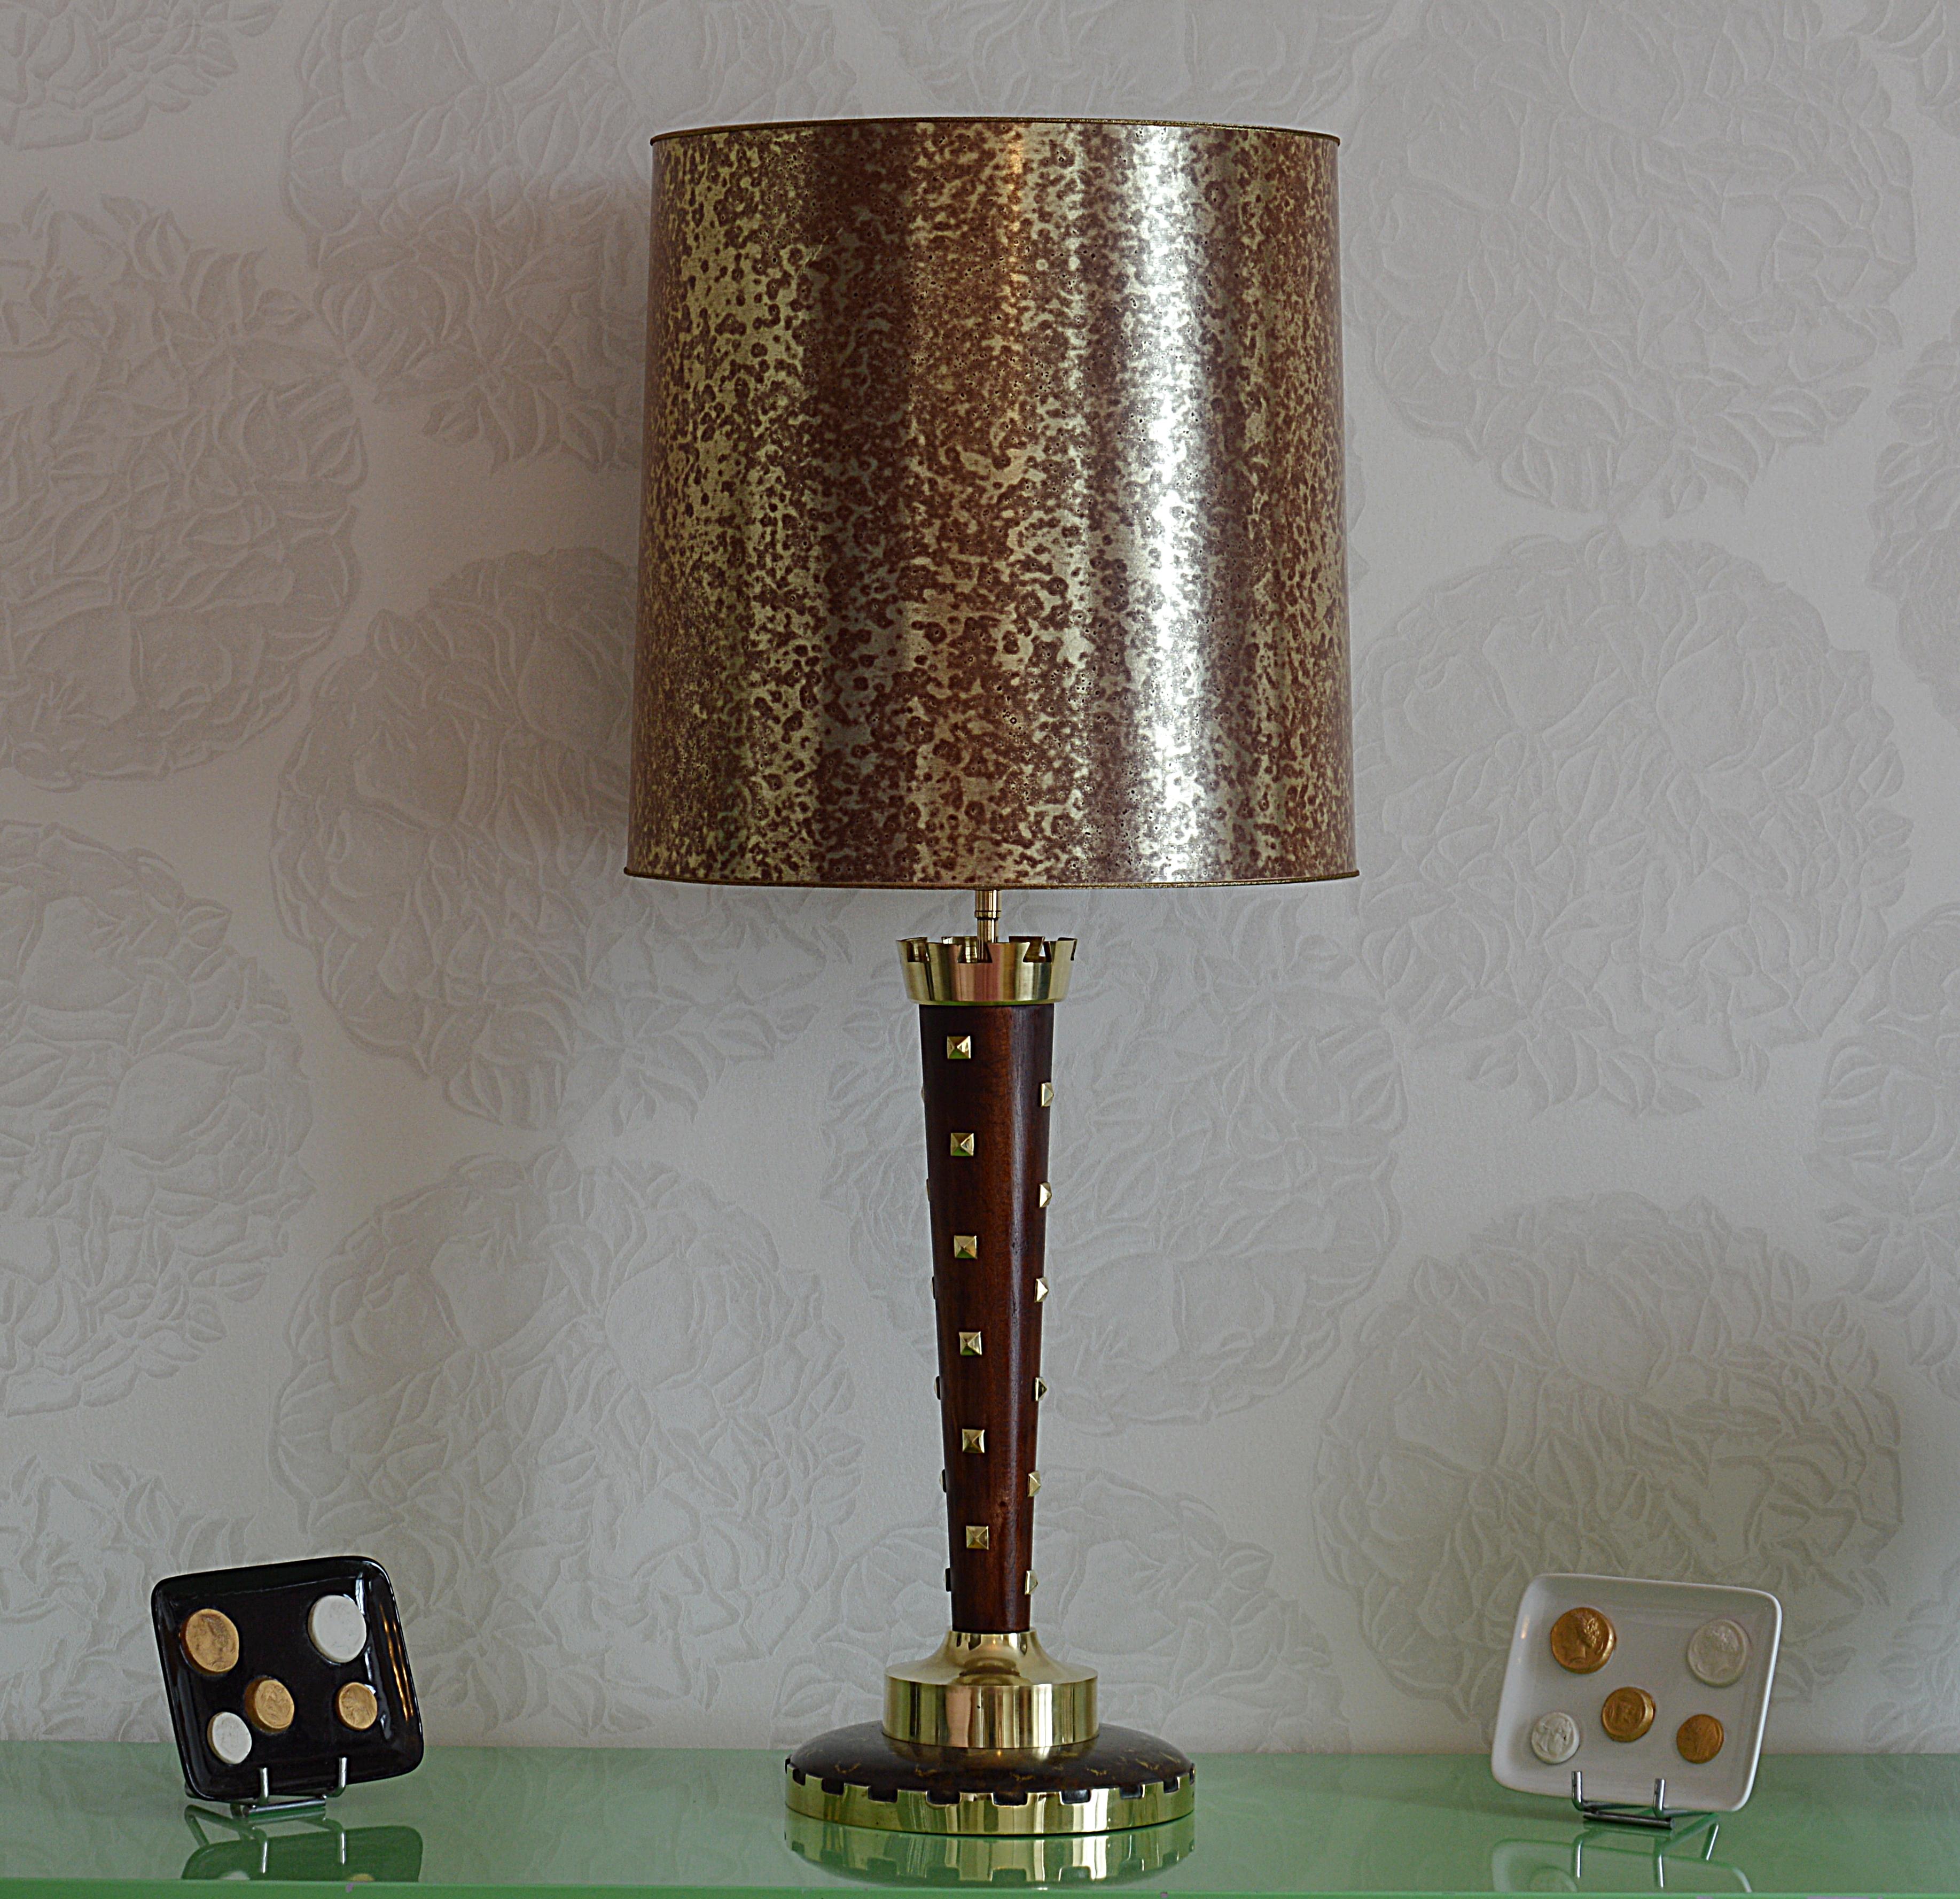 Large French, Art Deco table lamp by Genet & Michon, Paris, 1930-1936. The base is made of wood, bronze (partially patinated with oxidation) and brass. Cardboard lampshade. Measures: Height 31.3